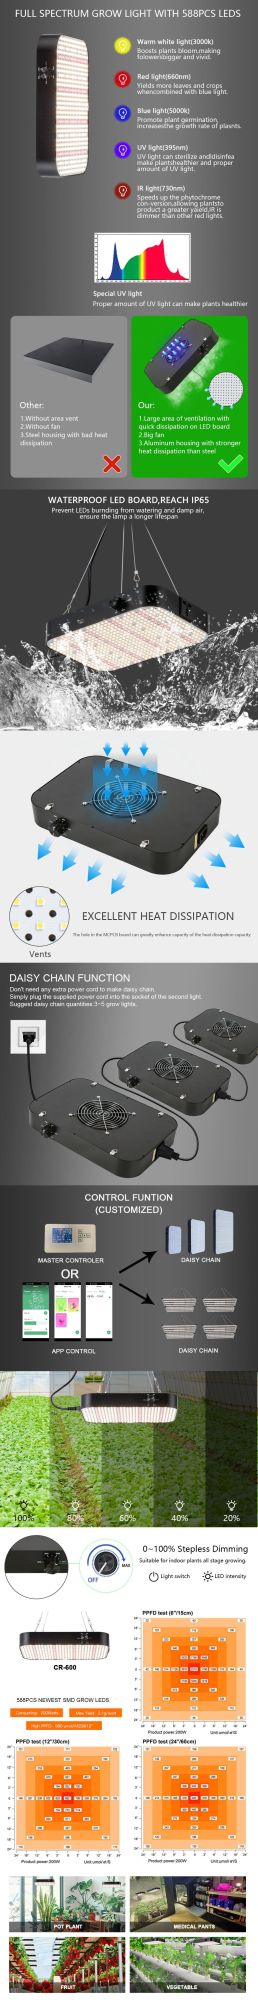 Factory Wholesale Price OEM Greenhouse Best Commercial Easy Indoor Grow Tent Mini 80W Aluminum Samsung Horticulture Pendant LED for Seedling Vegetable Light